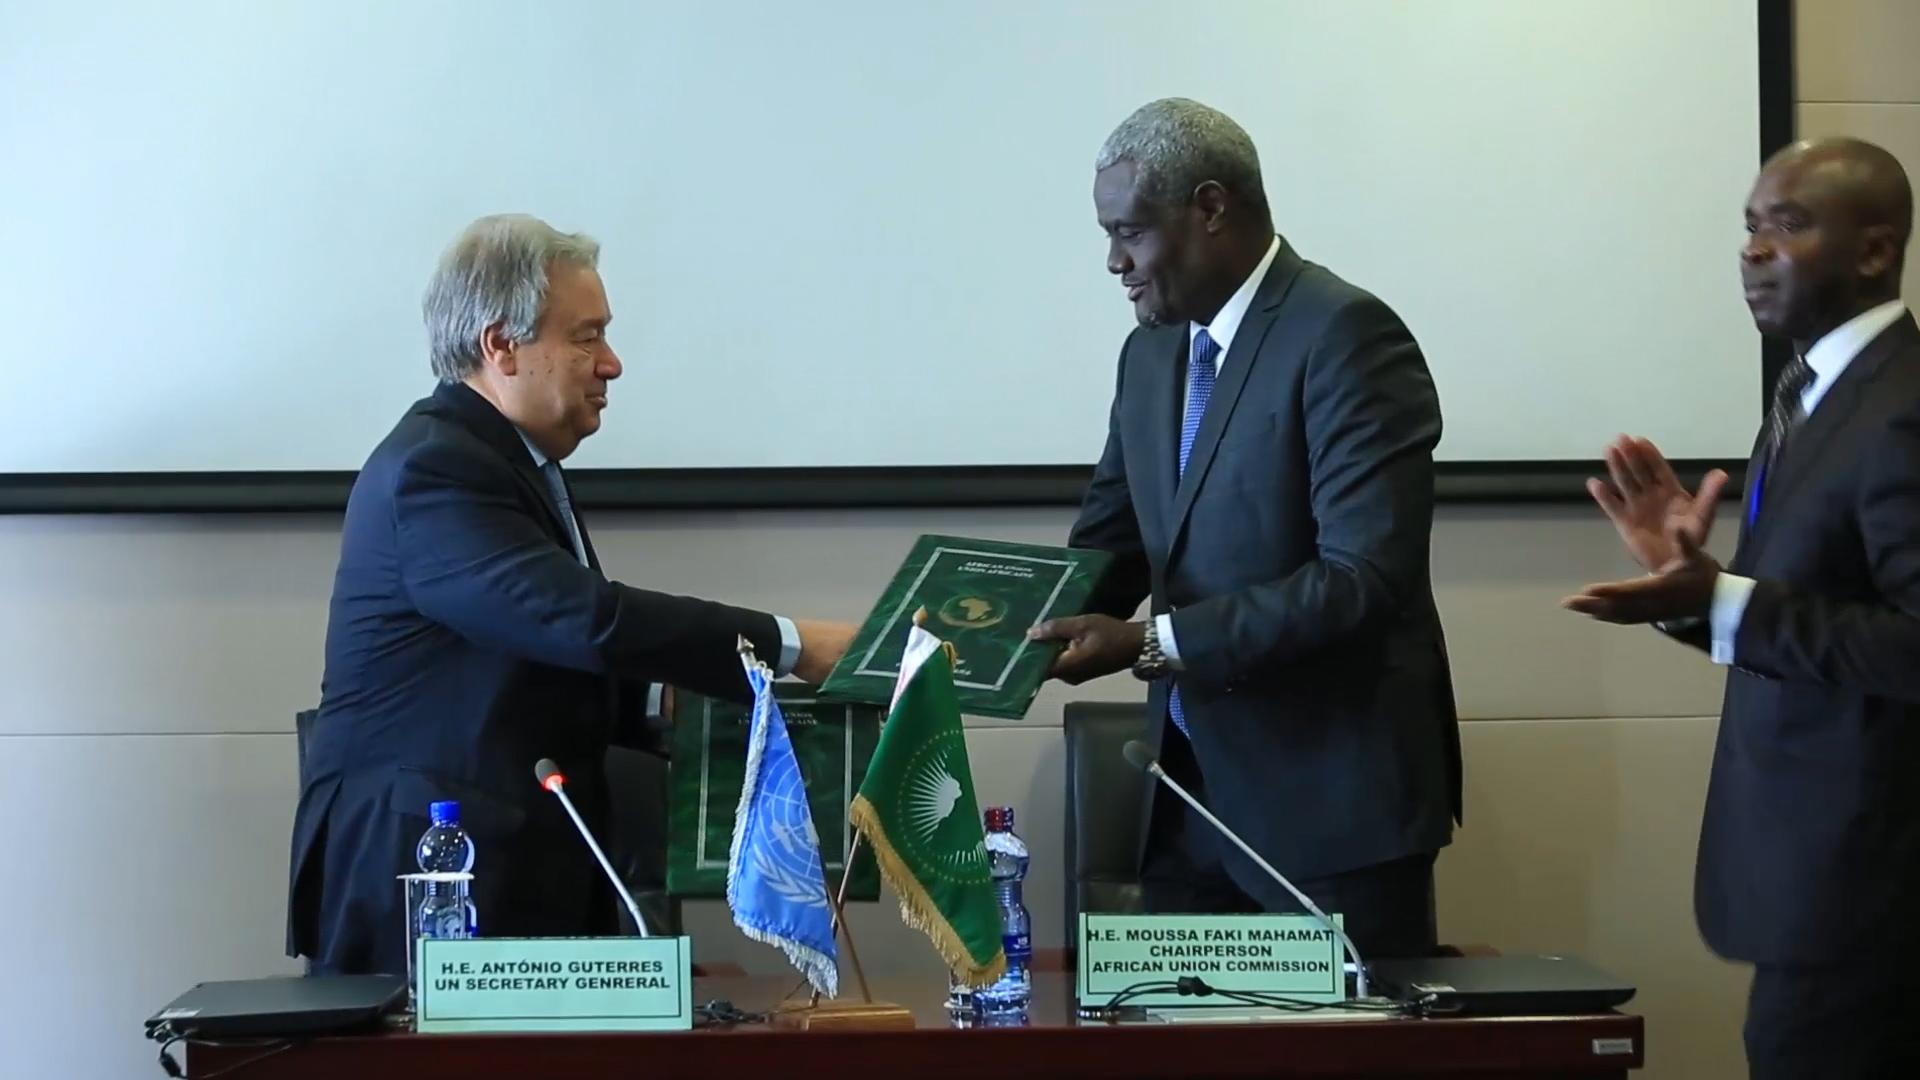 United Nations to Partner With African Union – Antonio Guterres